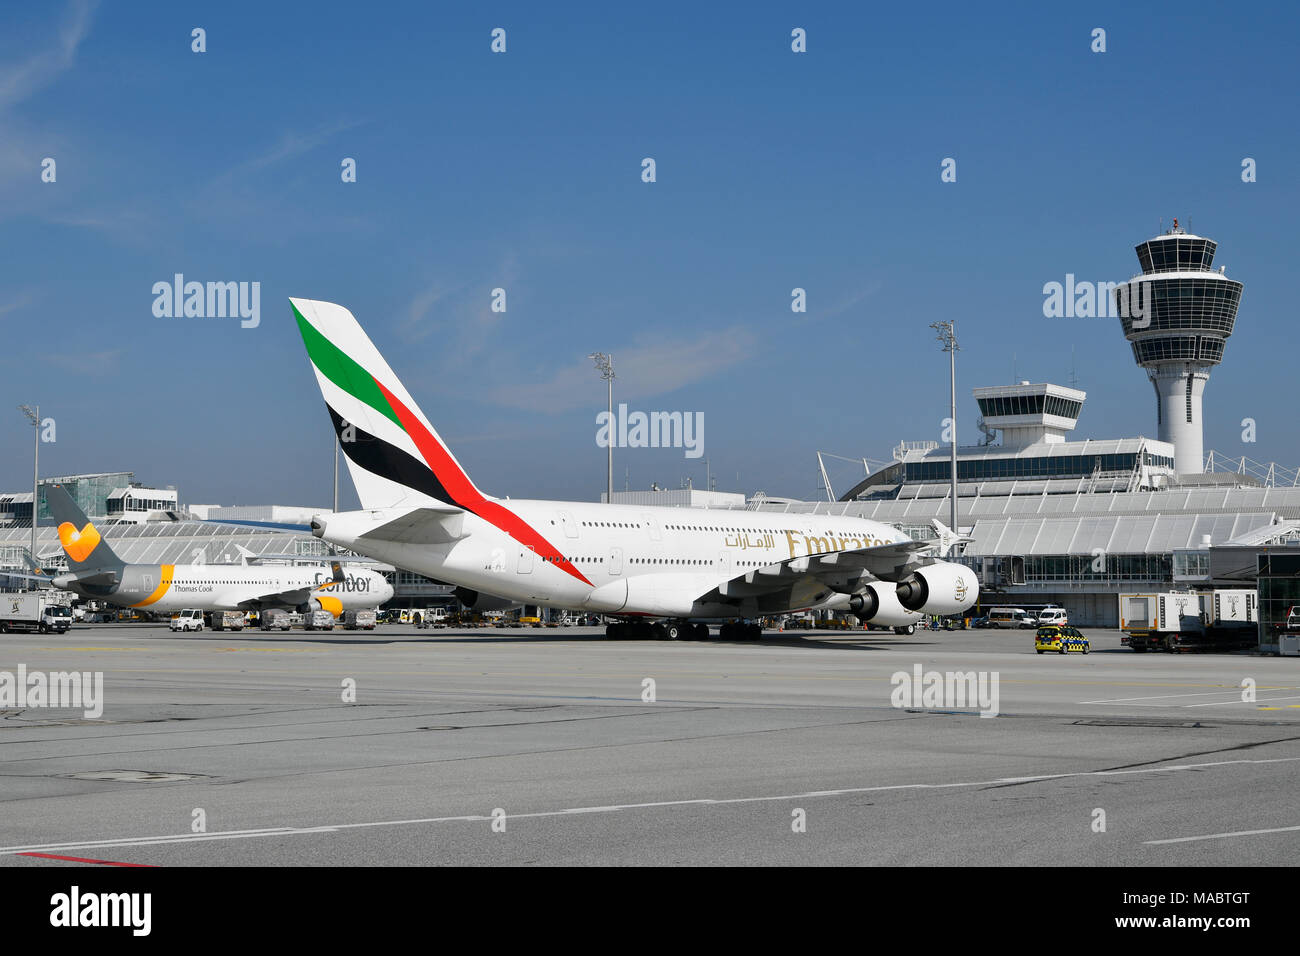 Emirates, Airbus, A380, A380-800, 800, Position, clearance, Landing, View, Travel, Trip, Flight, Terminal 1, Tower, Roll, Munich, Airport, MUC, Stock Photo